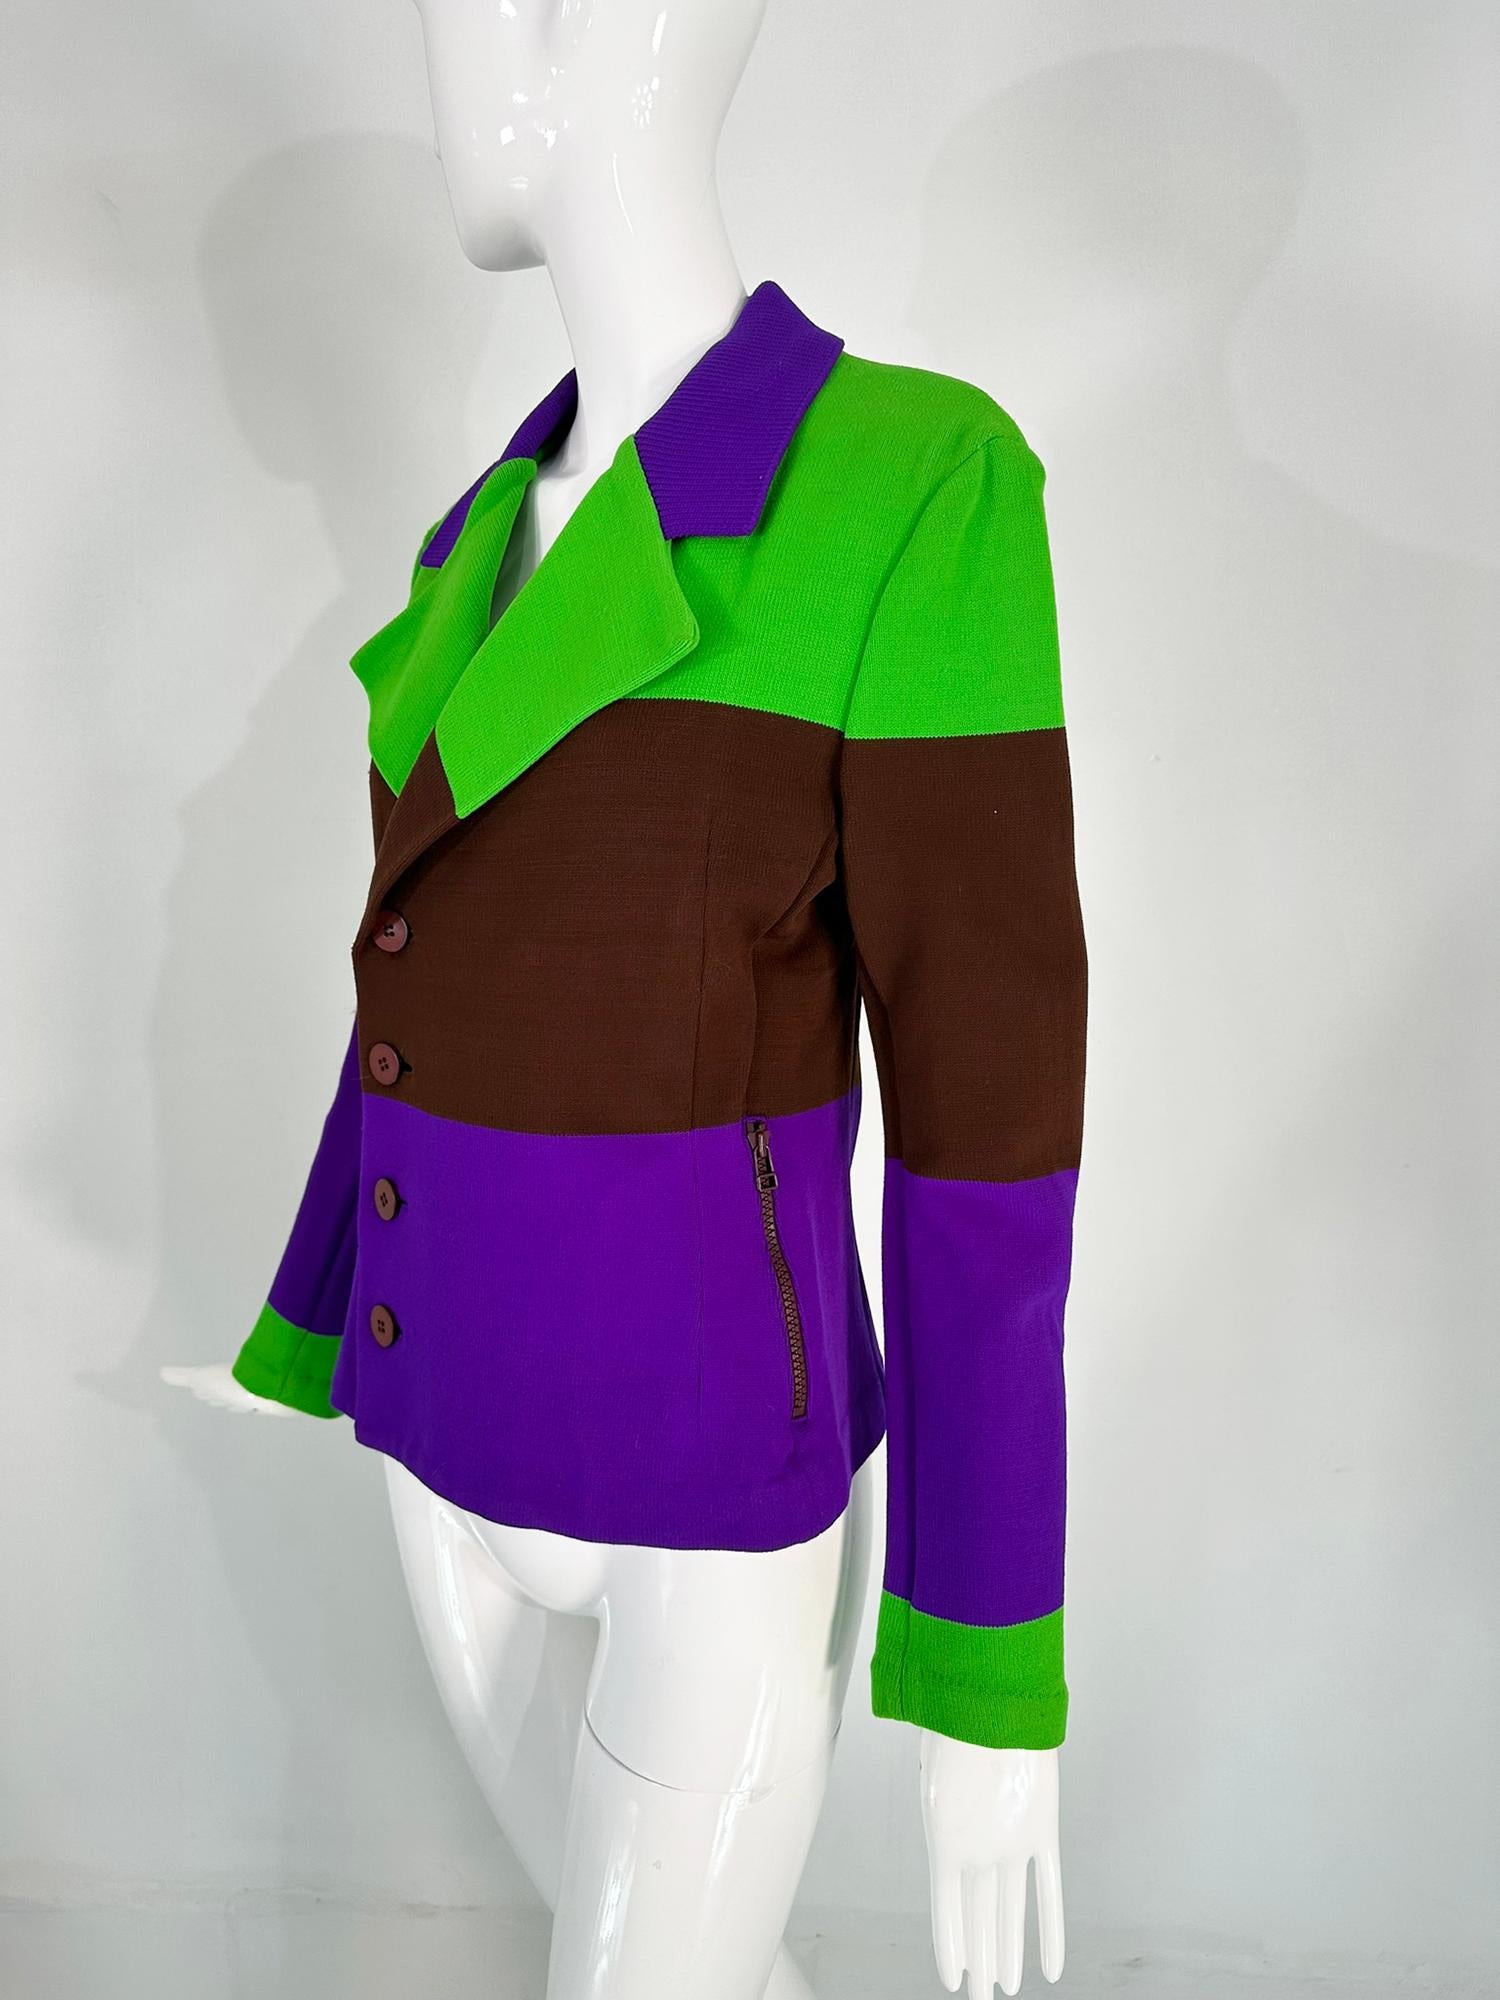 Issey Miyake Colour Block Nylon Knit Jacket in Acid Green Brown & Purple Small For Sale 5